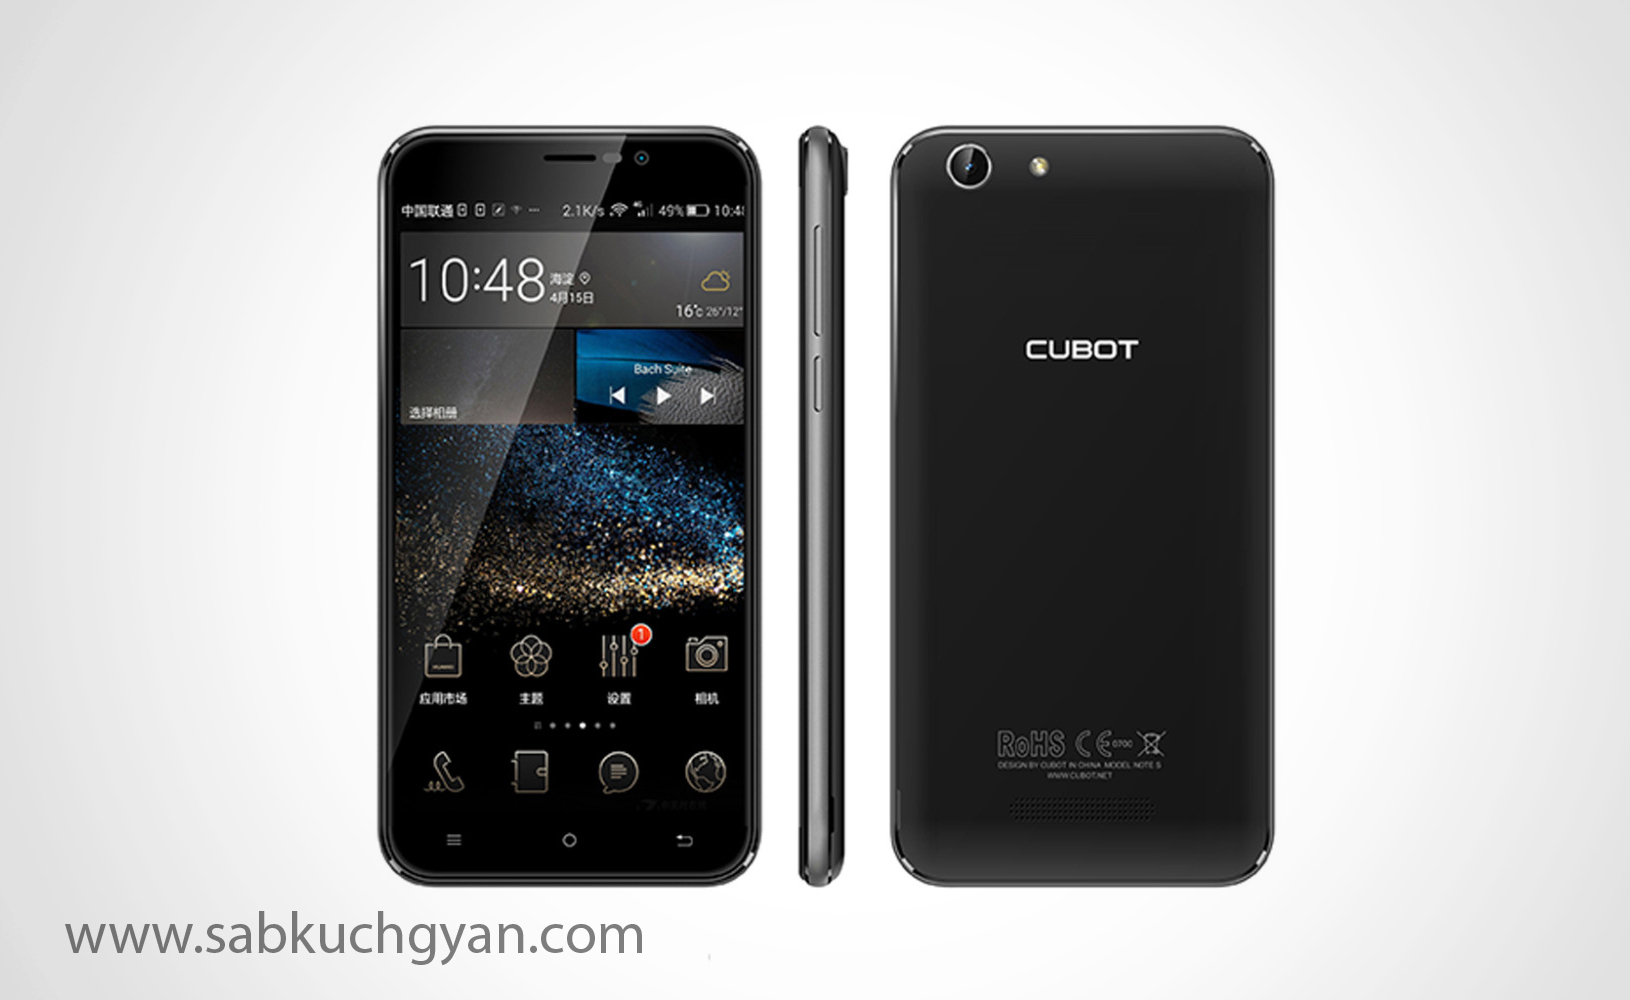 mi-smartphone-will-give-direct-competition-to-cubot-ss-rs-4599-phone (3)